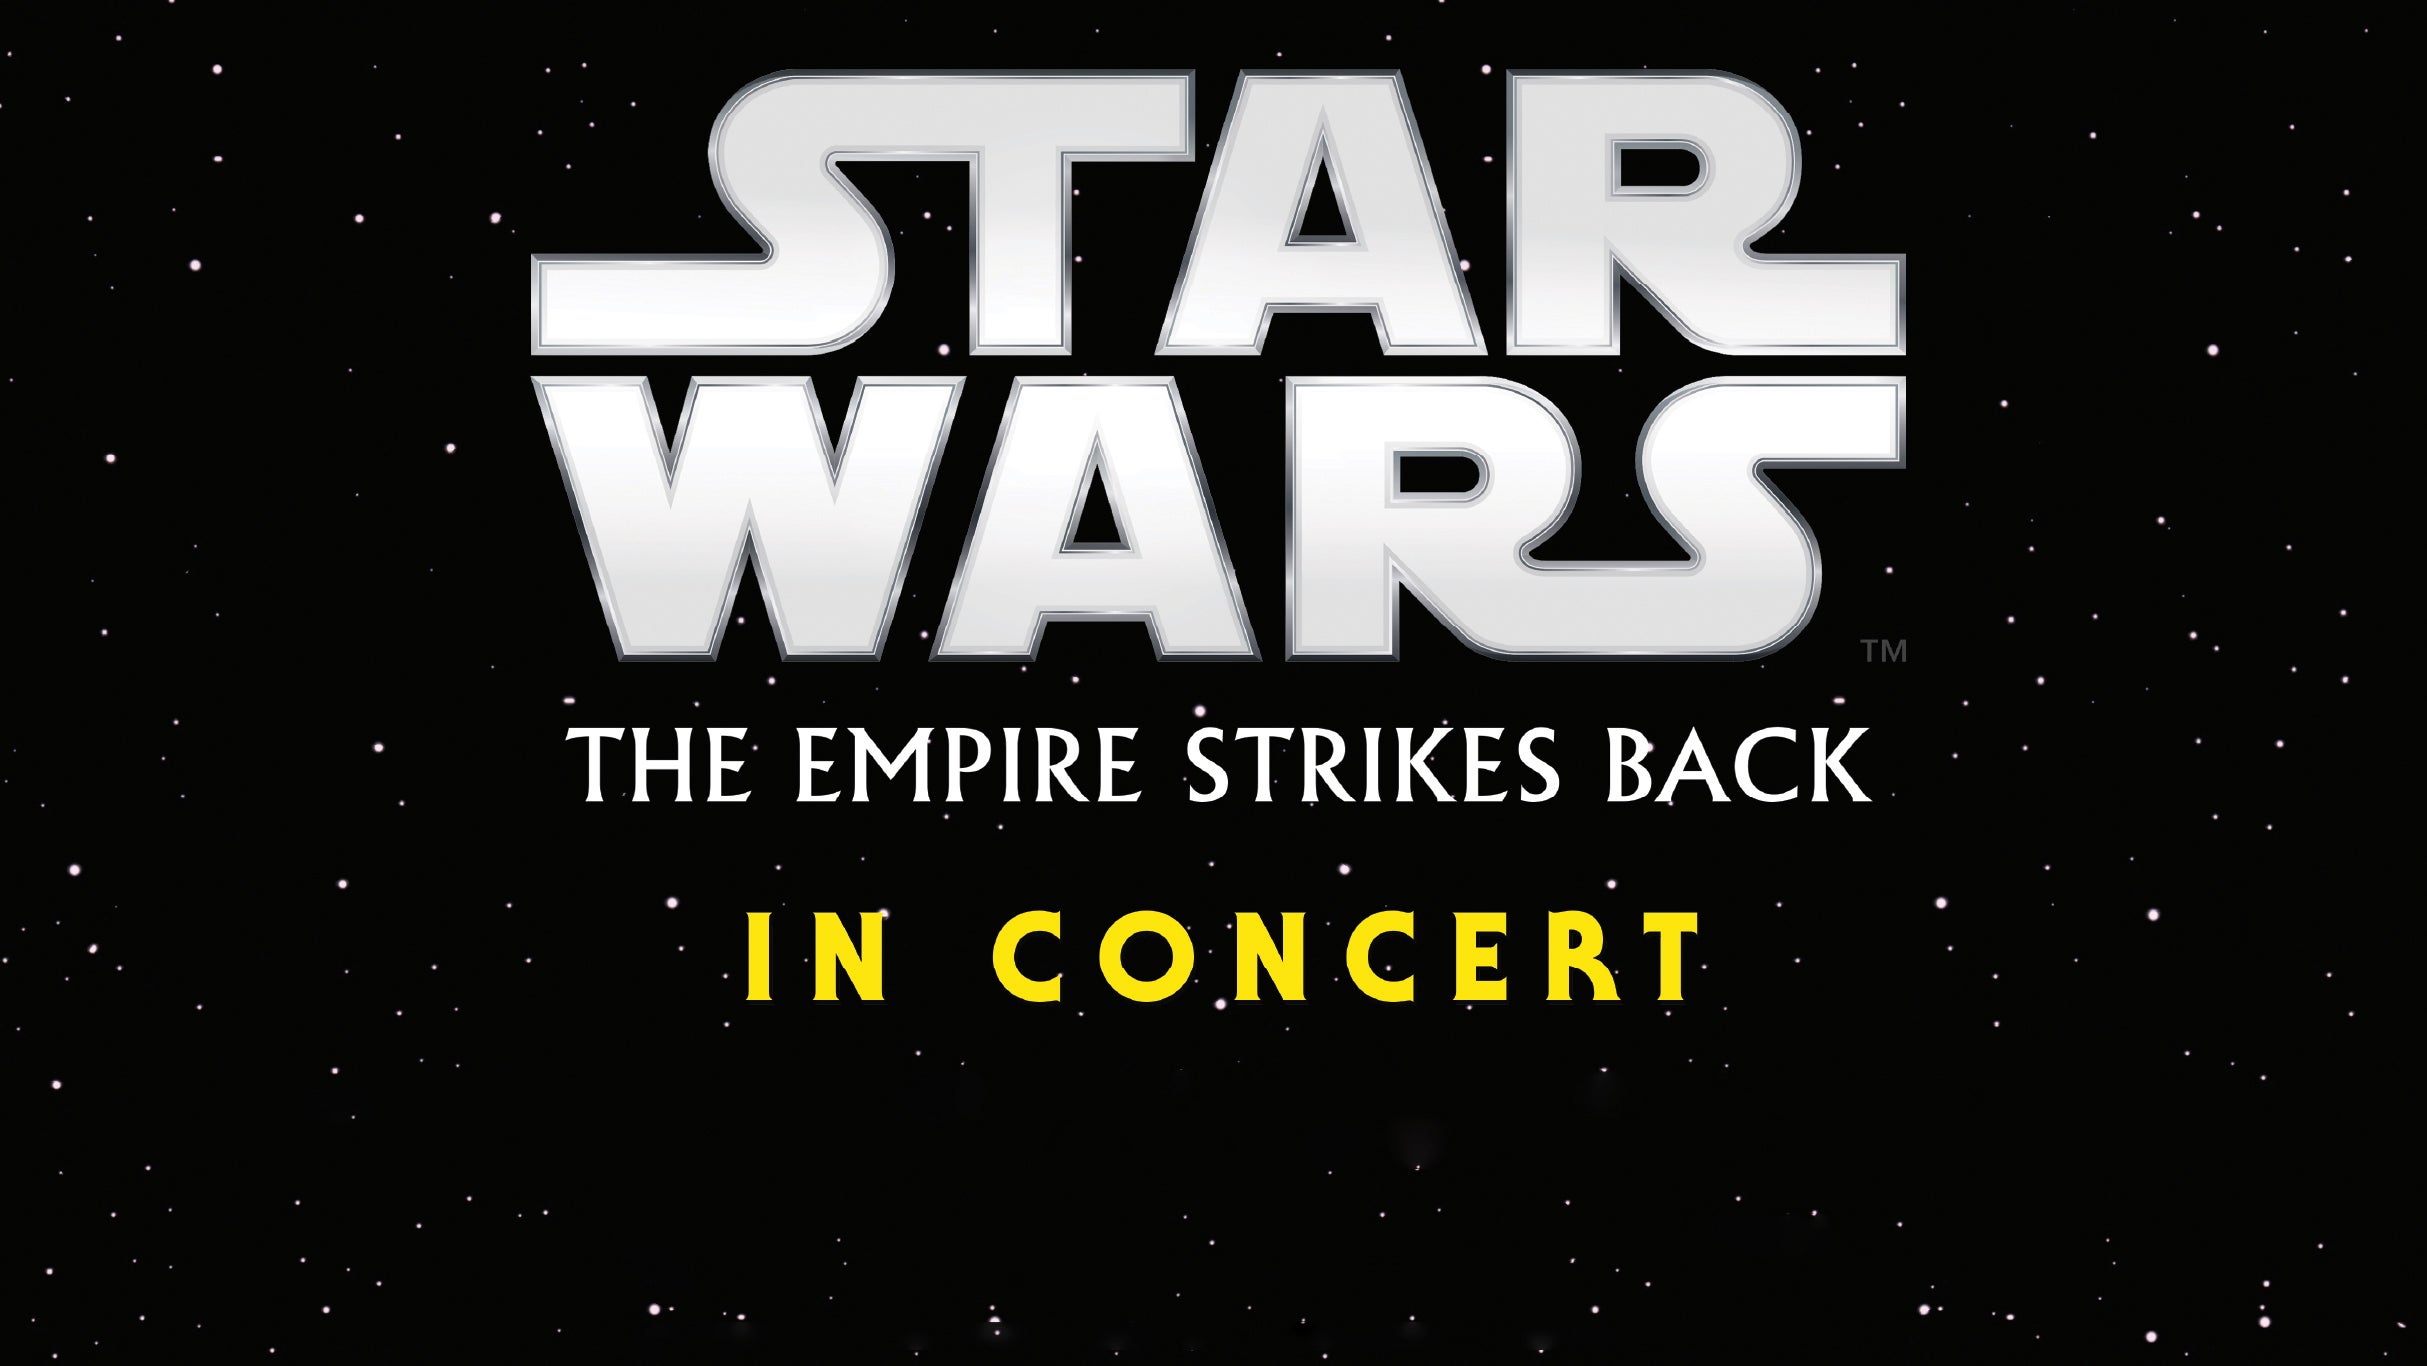 Star Wars: The Empire Strikes Back - In Concert presale password for early tickets in Edmonton